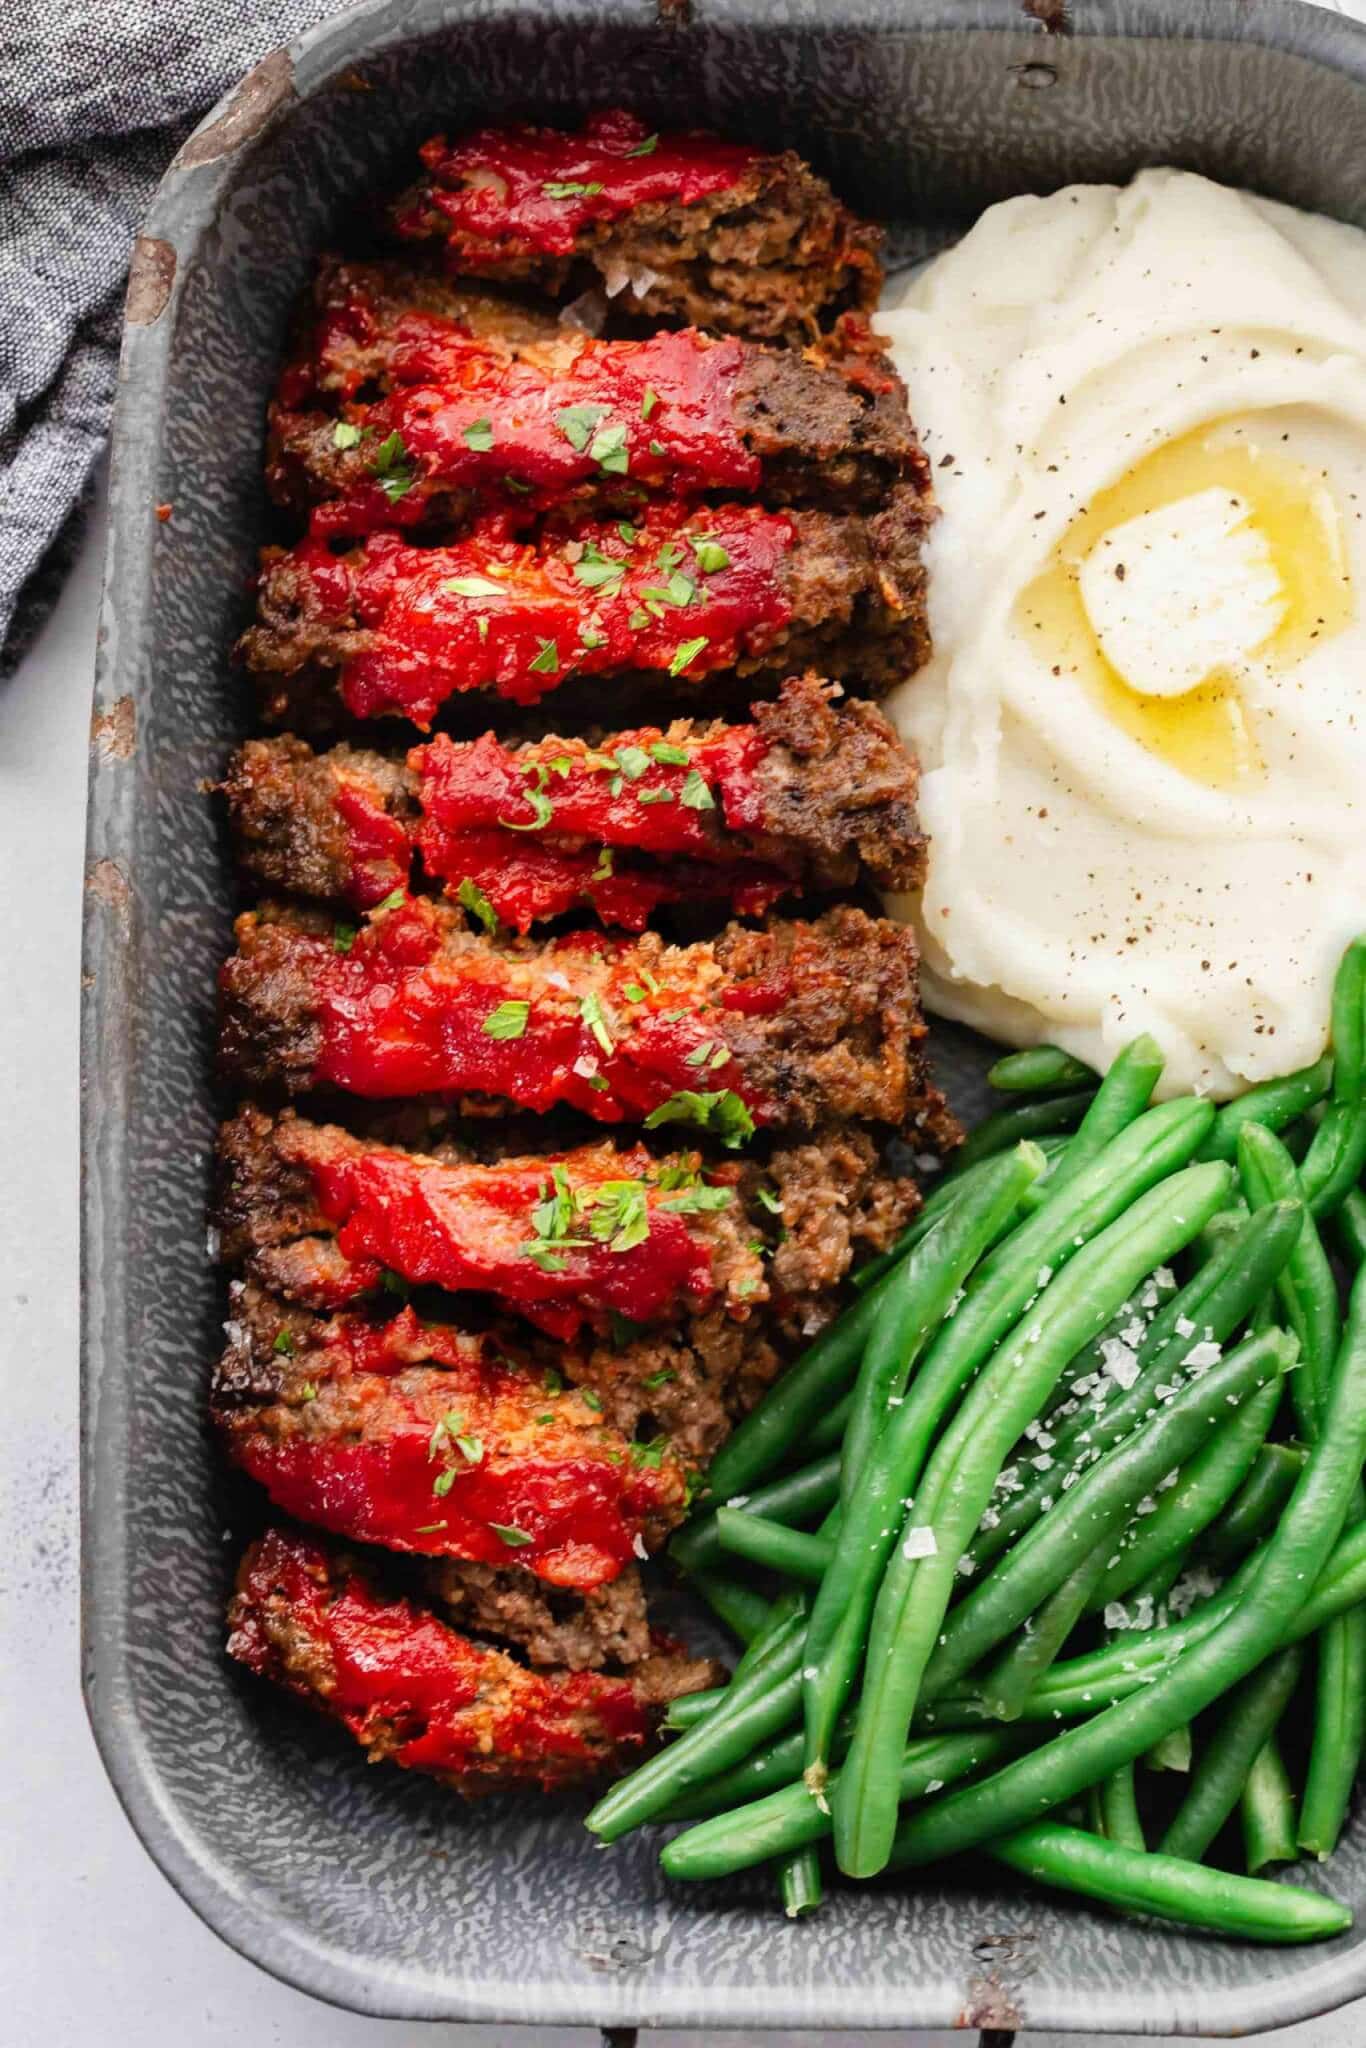 Sliced BOSTON MARKET meatloaf in serving tray with green beans and mashed potatoes.